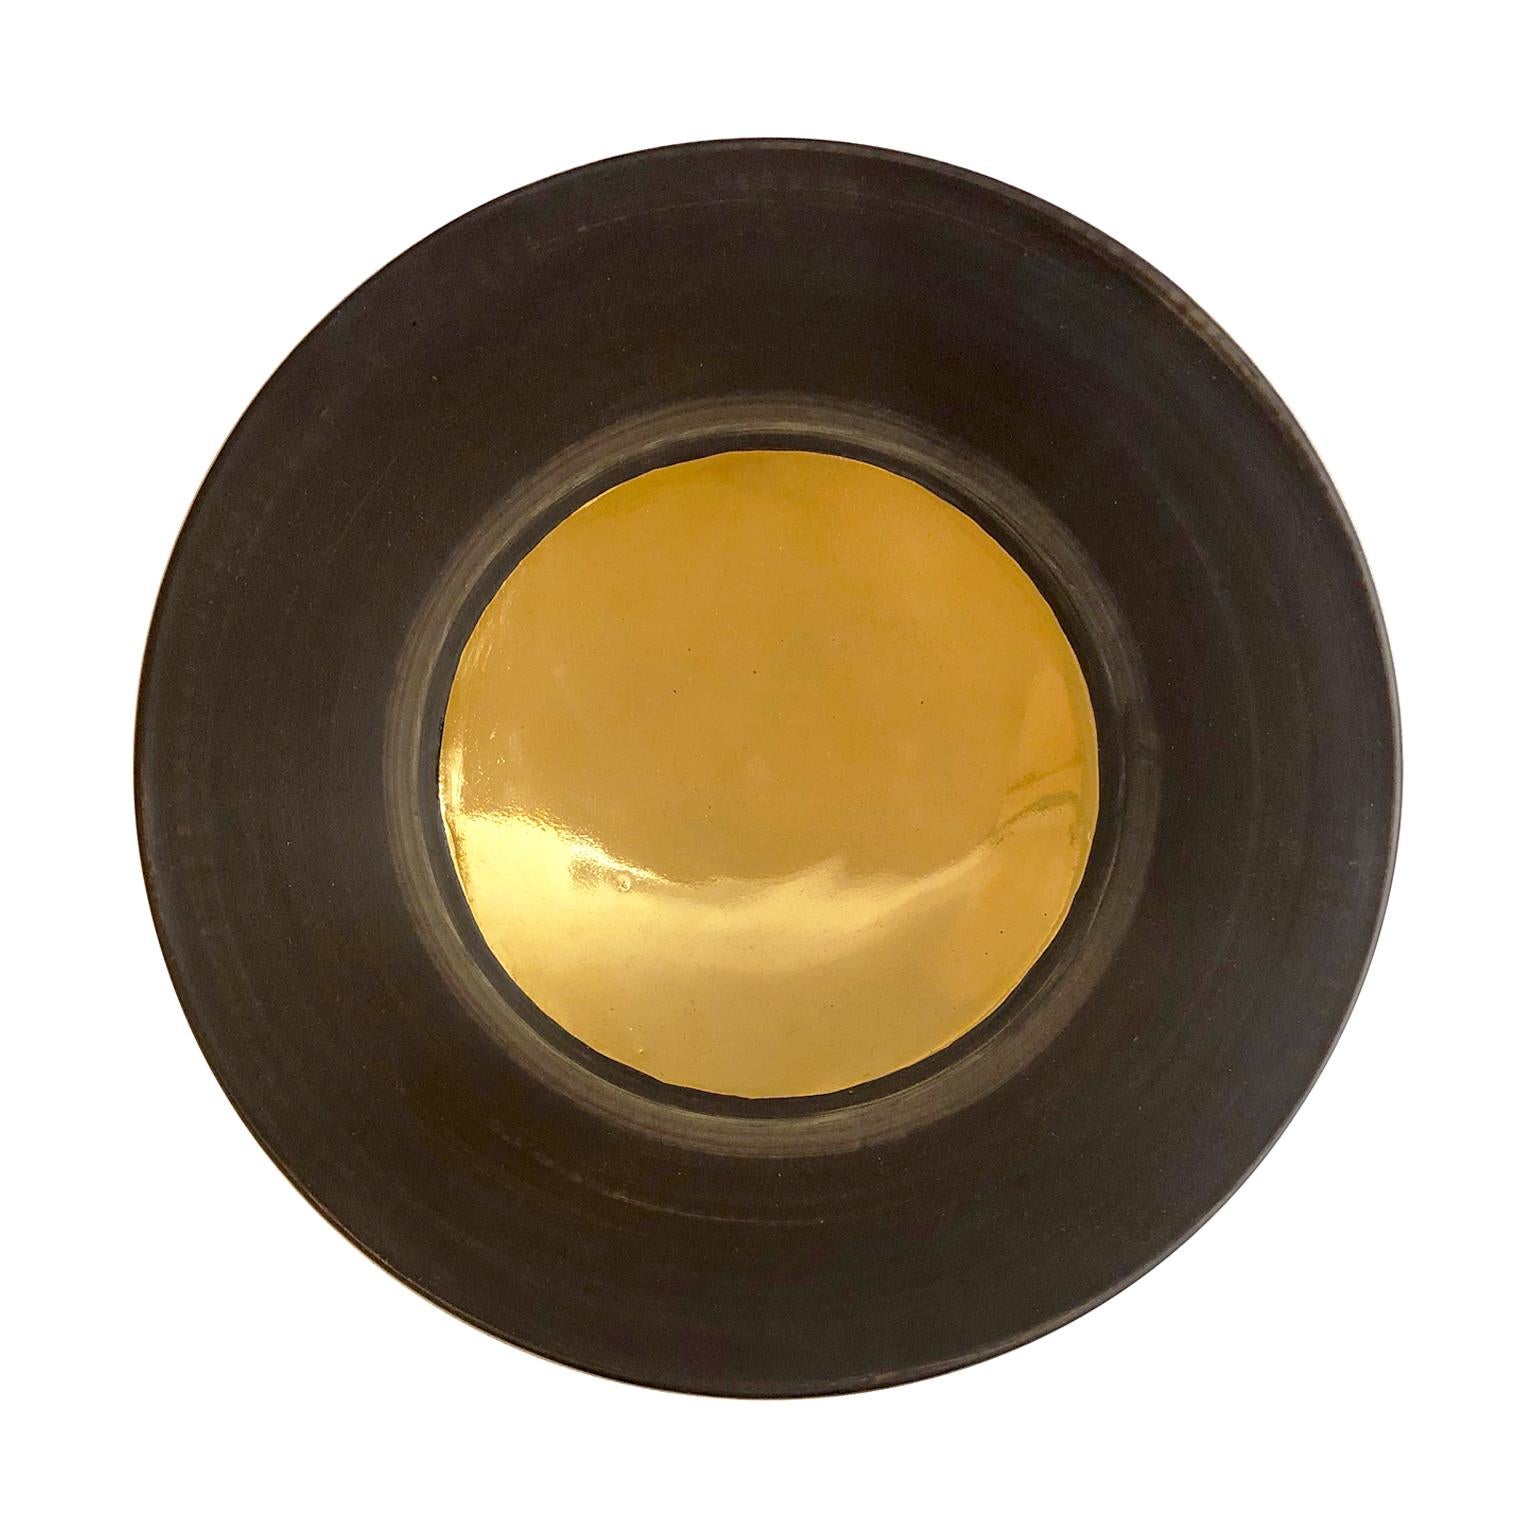 Low ceramic bowl with rust glaze and 22-karat gold lustre interior by Sandi Fellman, 2019. 


Veteran photographer Sandi Fellman's ceramic vessels are an exploration of a new medium. The forms, palettes, and sensuality of her photos can be found